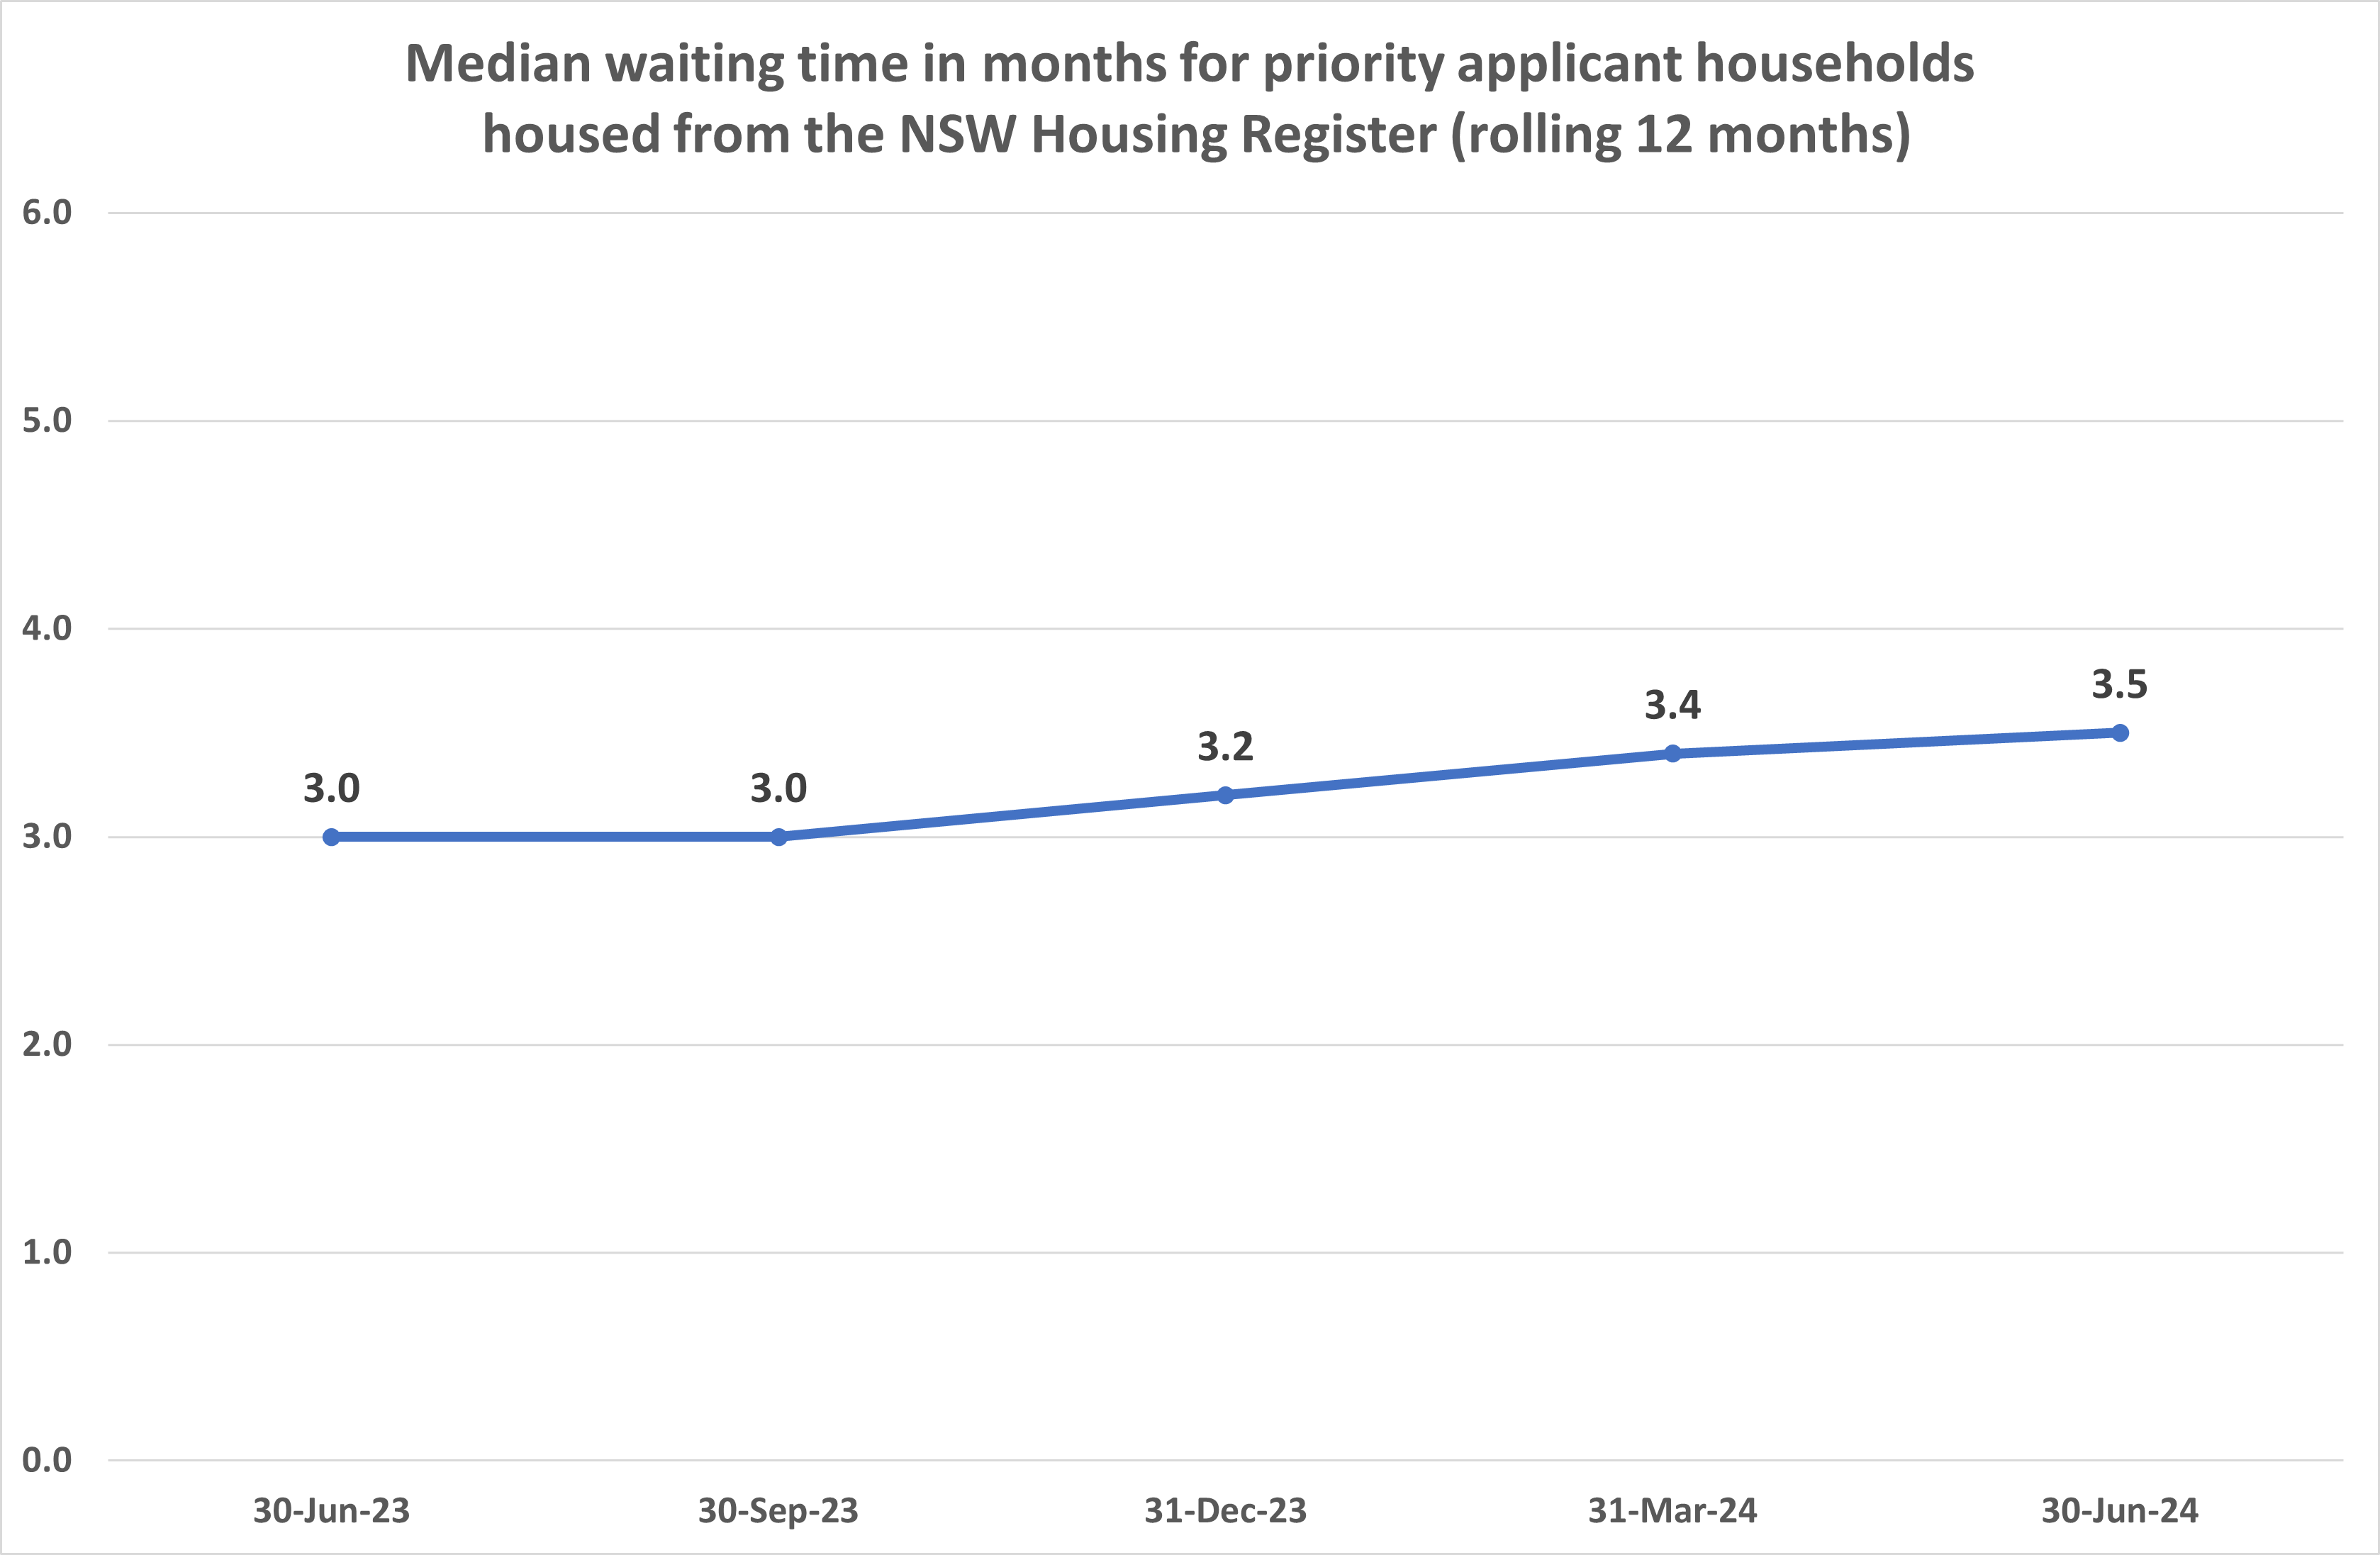 Line graph depicting median waiting time in months for priority applicant households housed from the NSW Housing Register